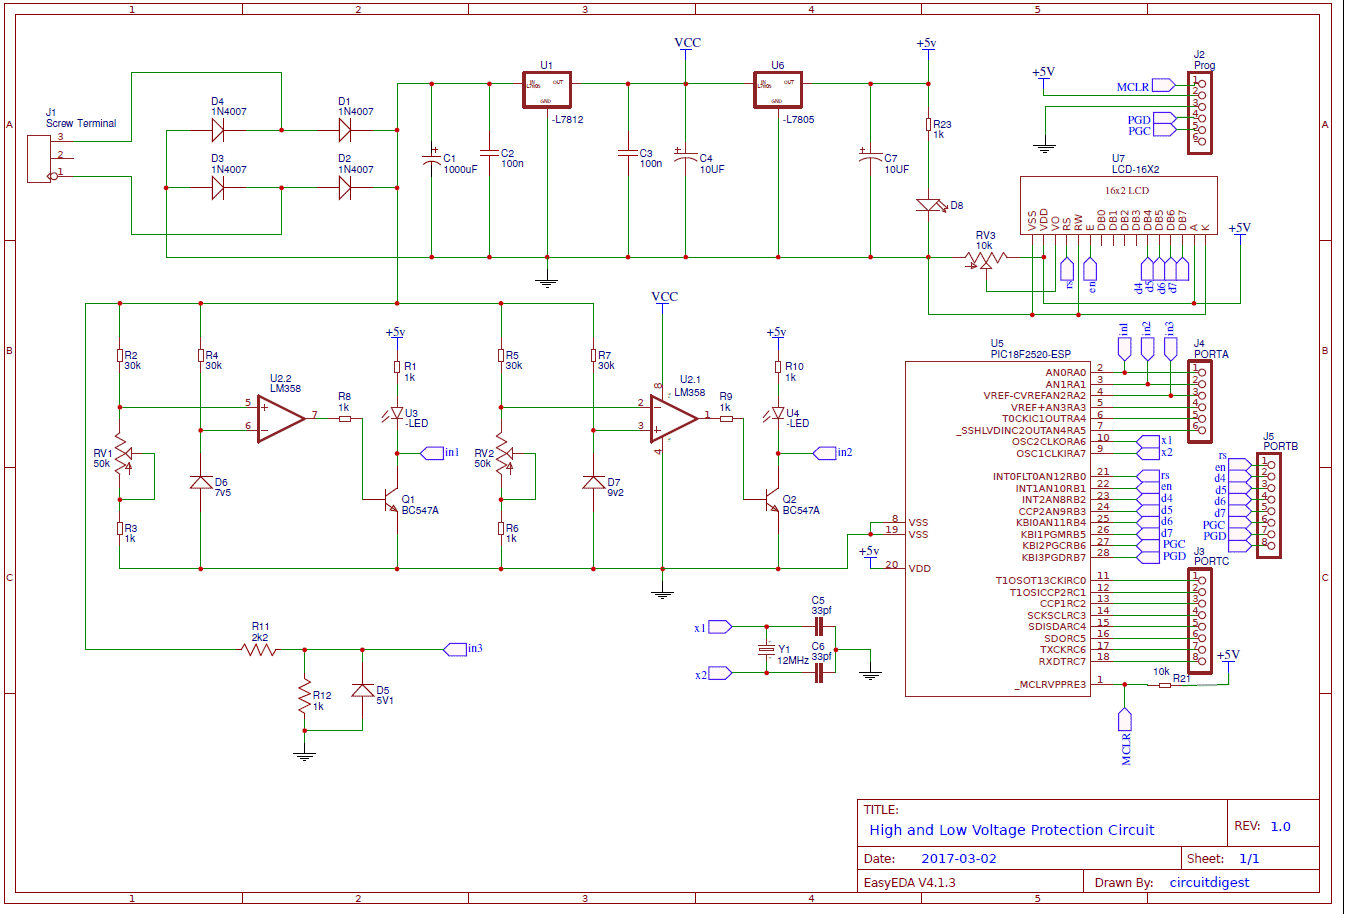 High/Low Voltage Detection and Protection Circuit using PIC Microcontroller